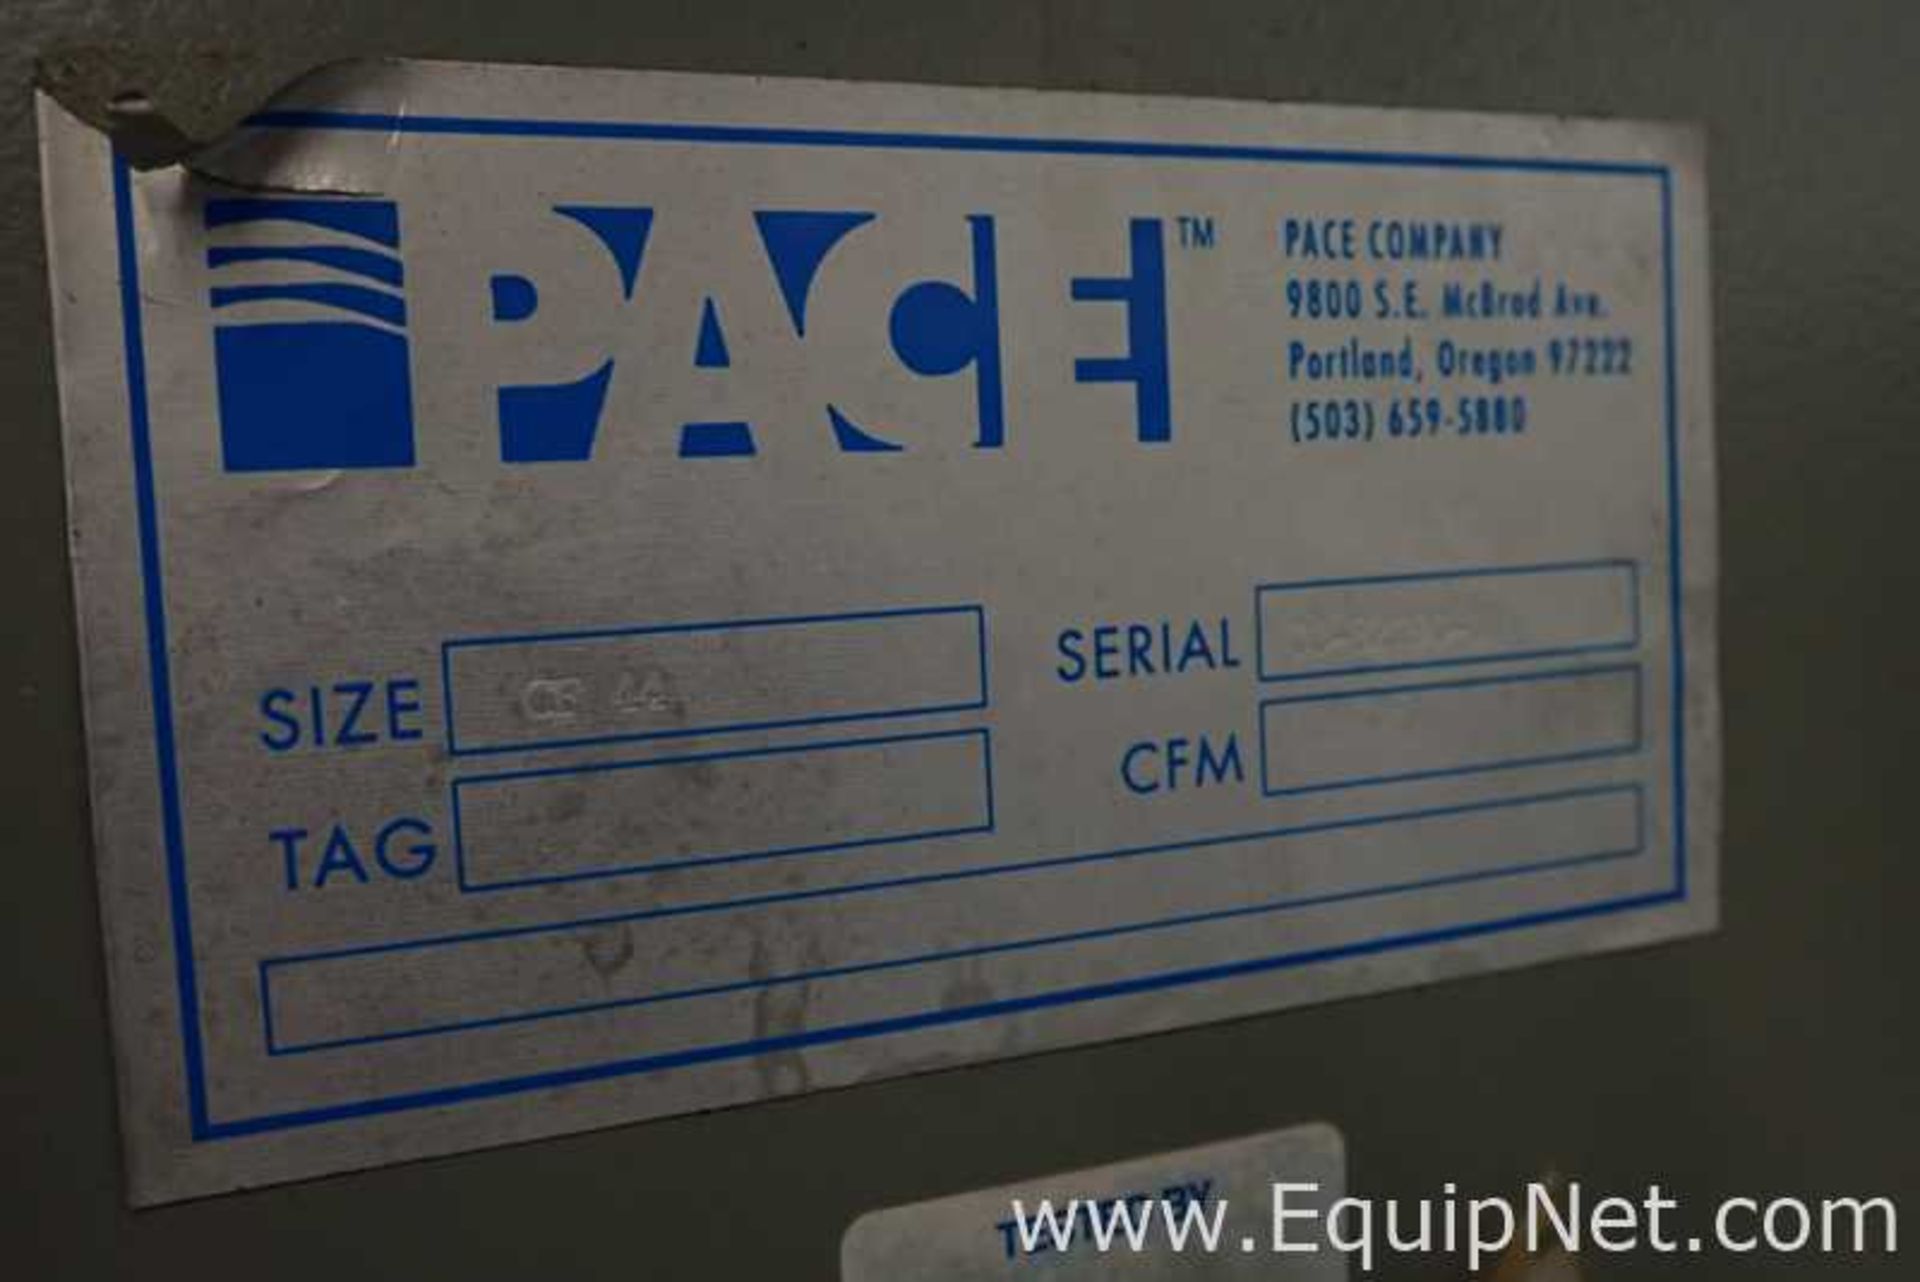 Pace Company CF-44 General Air Handler Fan and Motor 40,000 CFM 6.00 SP 1165 - Image 24 of 26